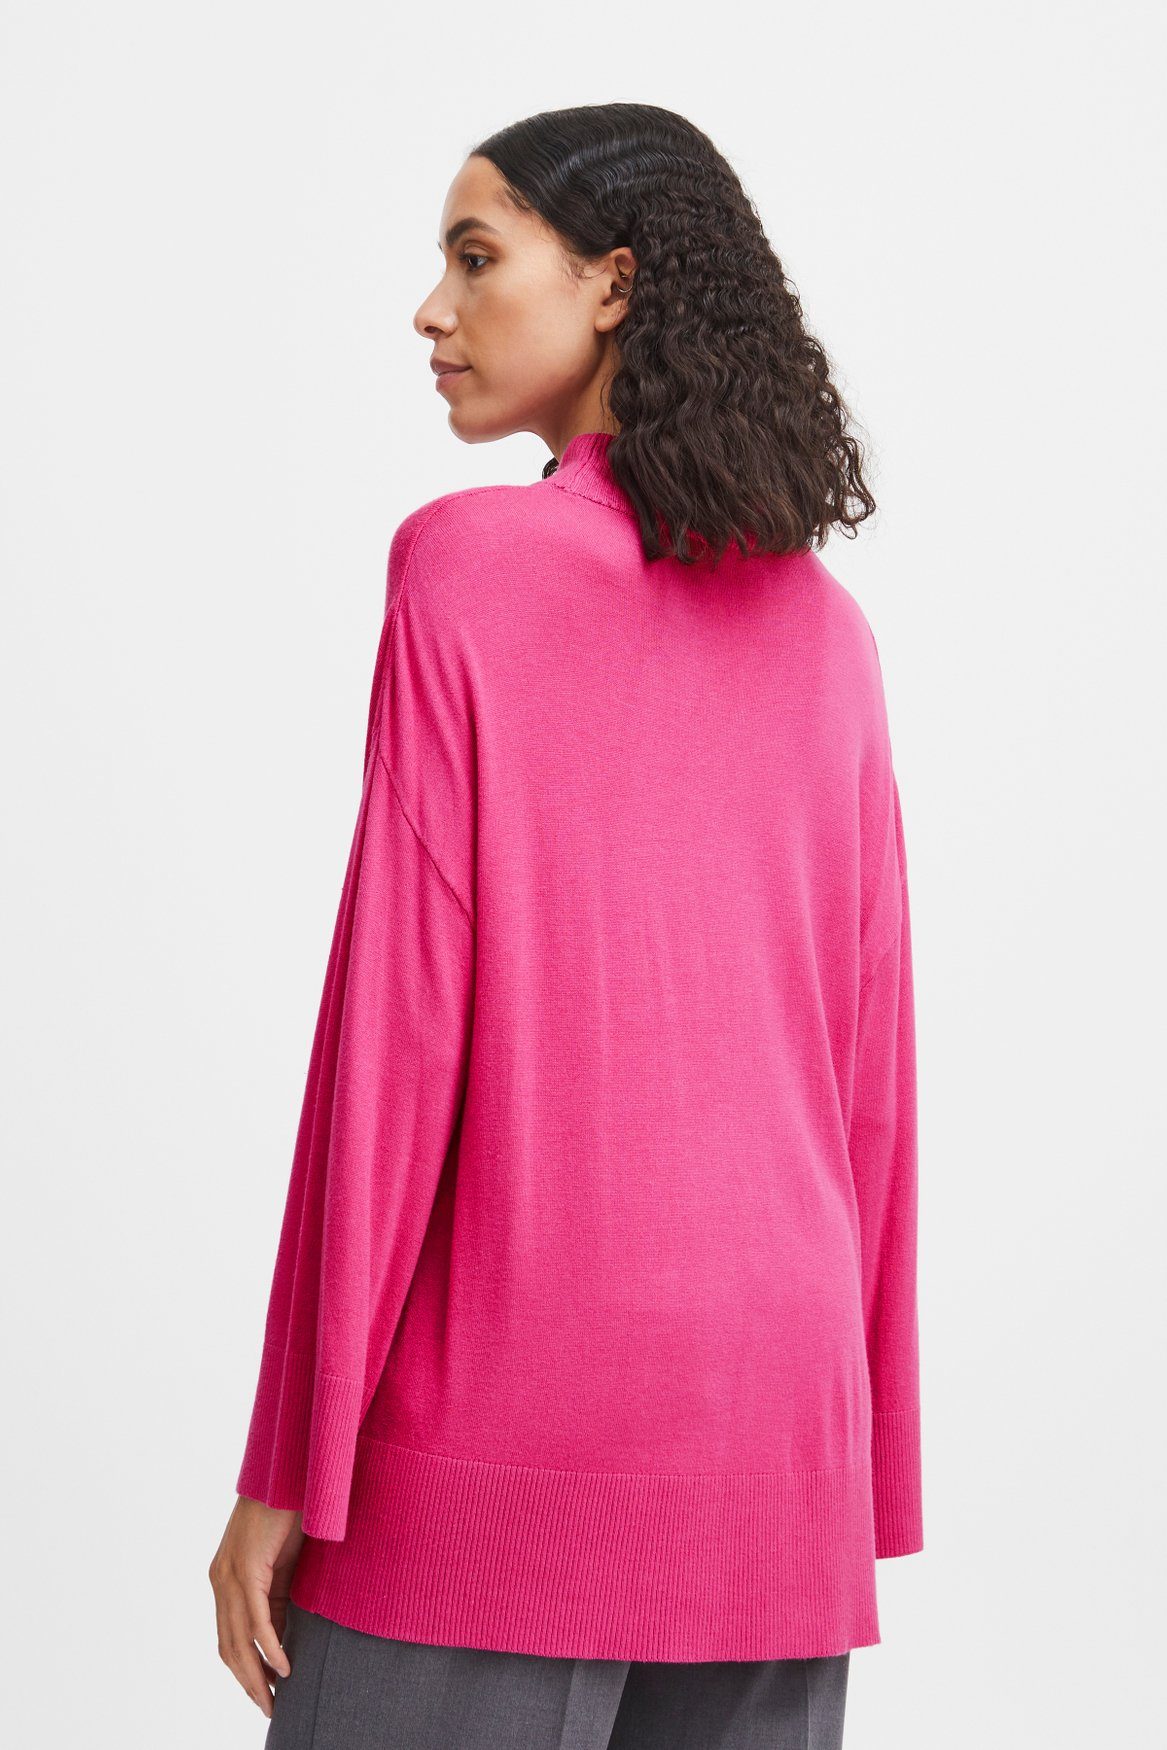 6263 Langarm Shirt Feinstrick in b.young BYMMPIMBA1 Strickpullover Pullover Pink